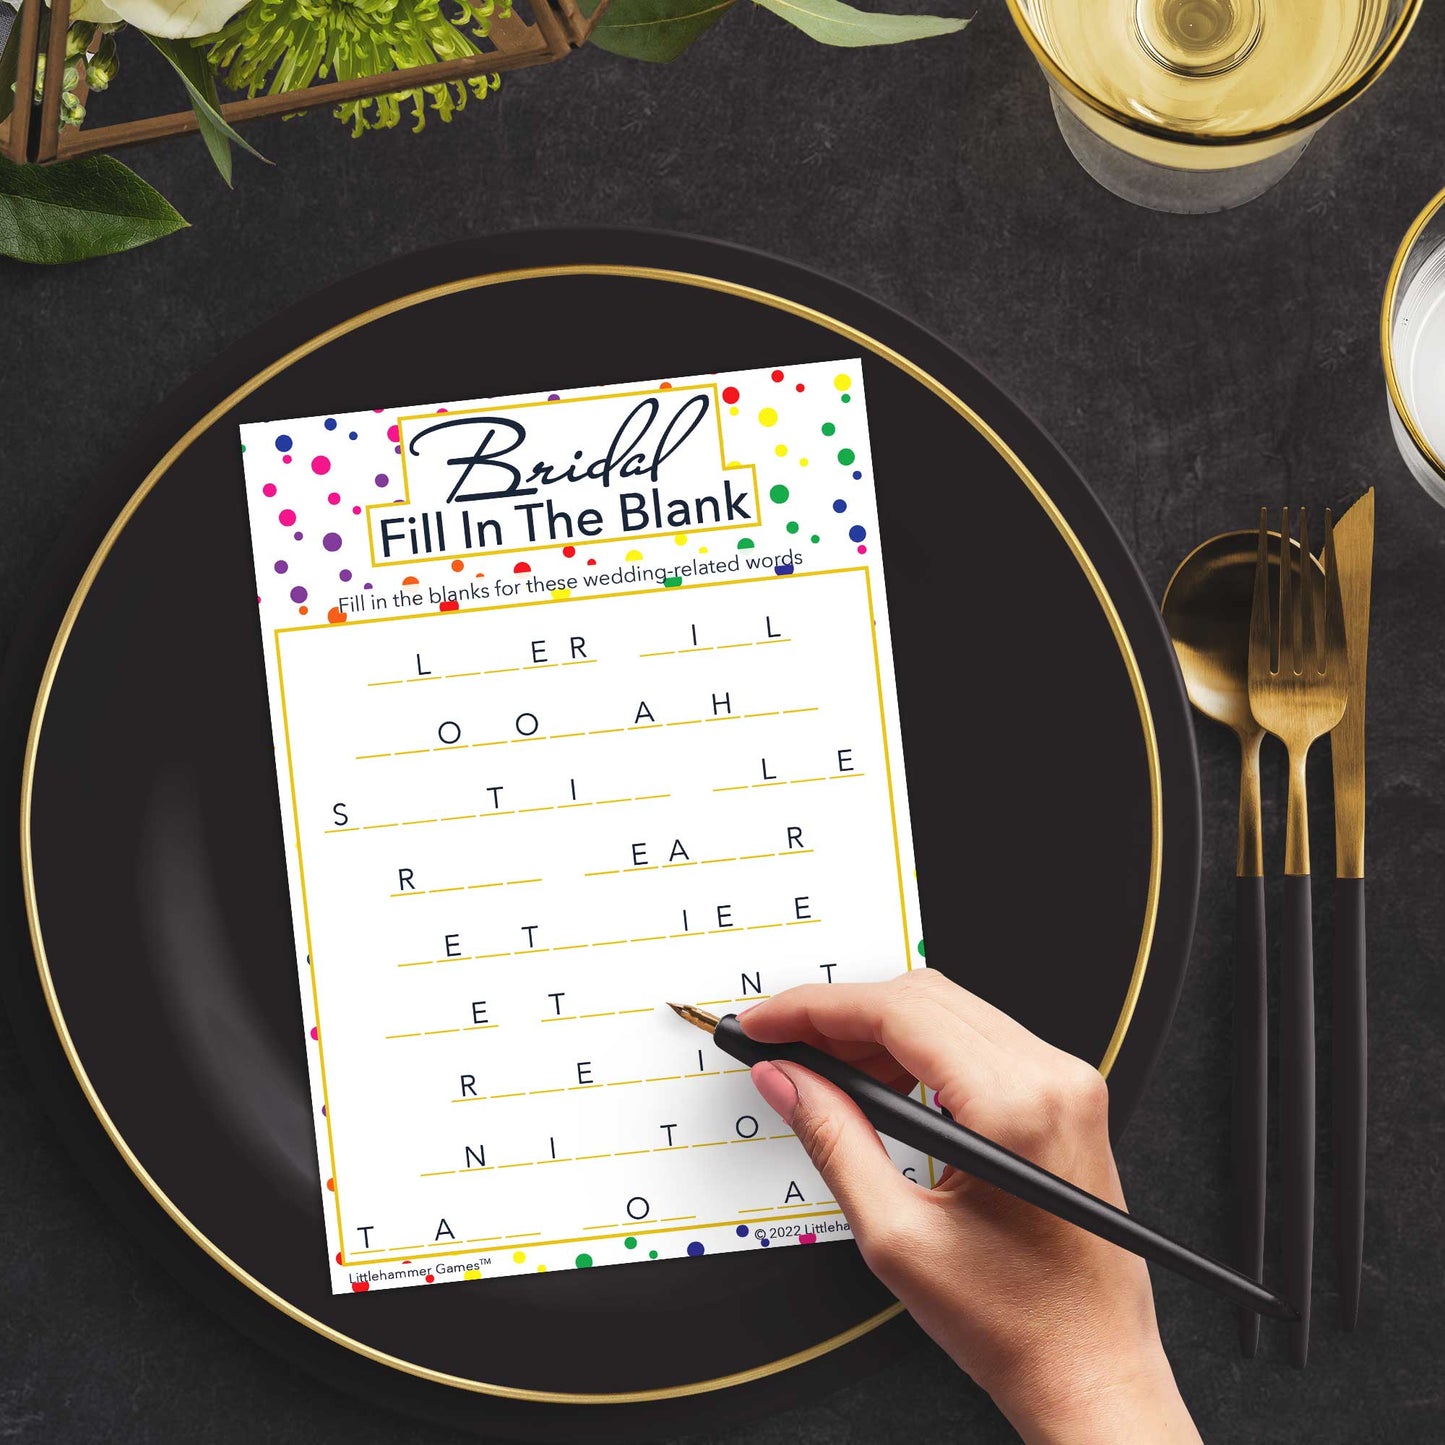 Woman with a pen playing a rainbow polka dot Bridal Fill in the Blank game card at a dark place setting